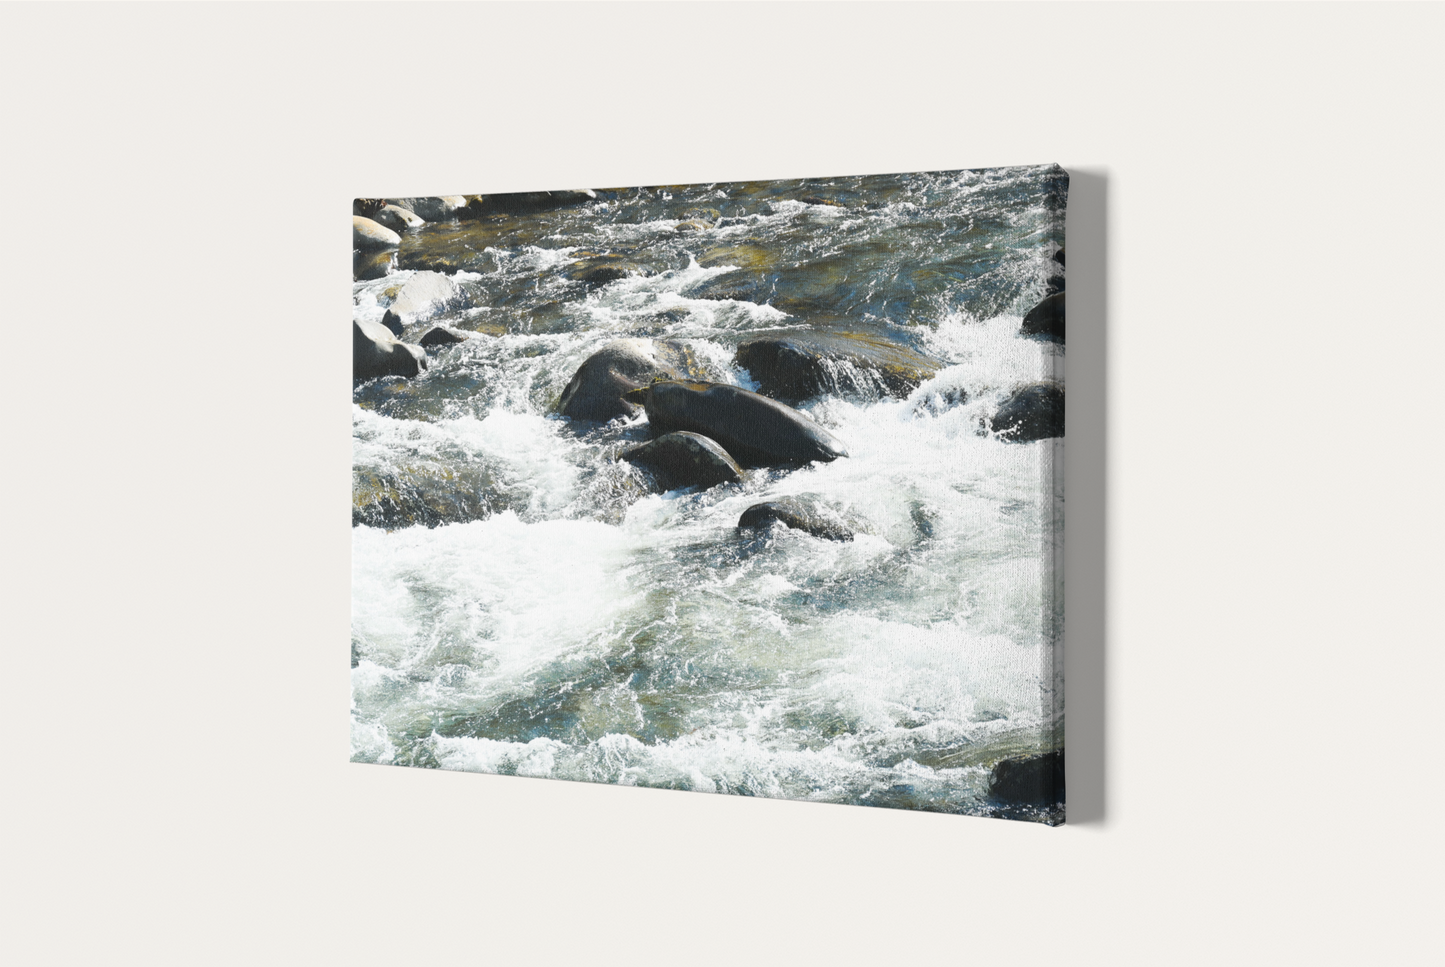 Waterfall and rocks nature photography canvas print